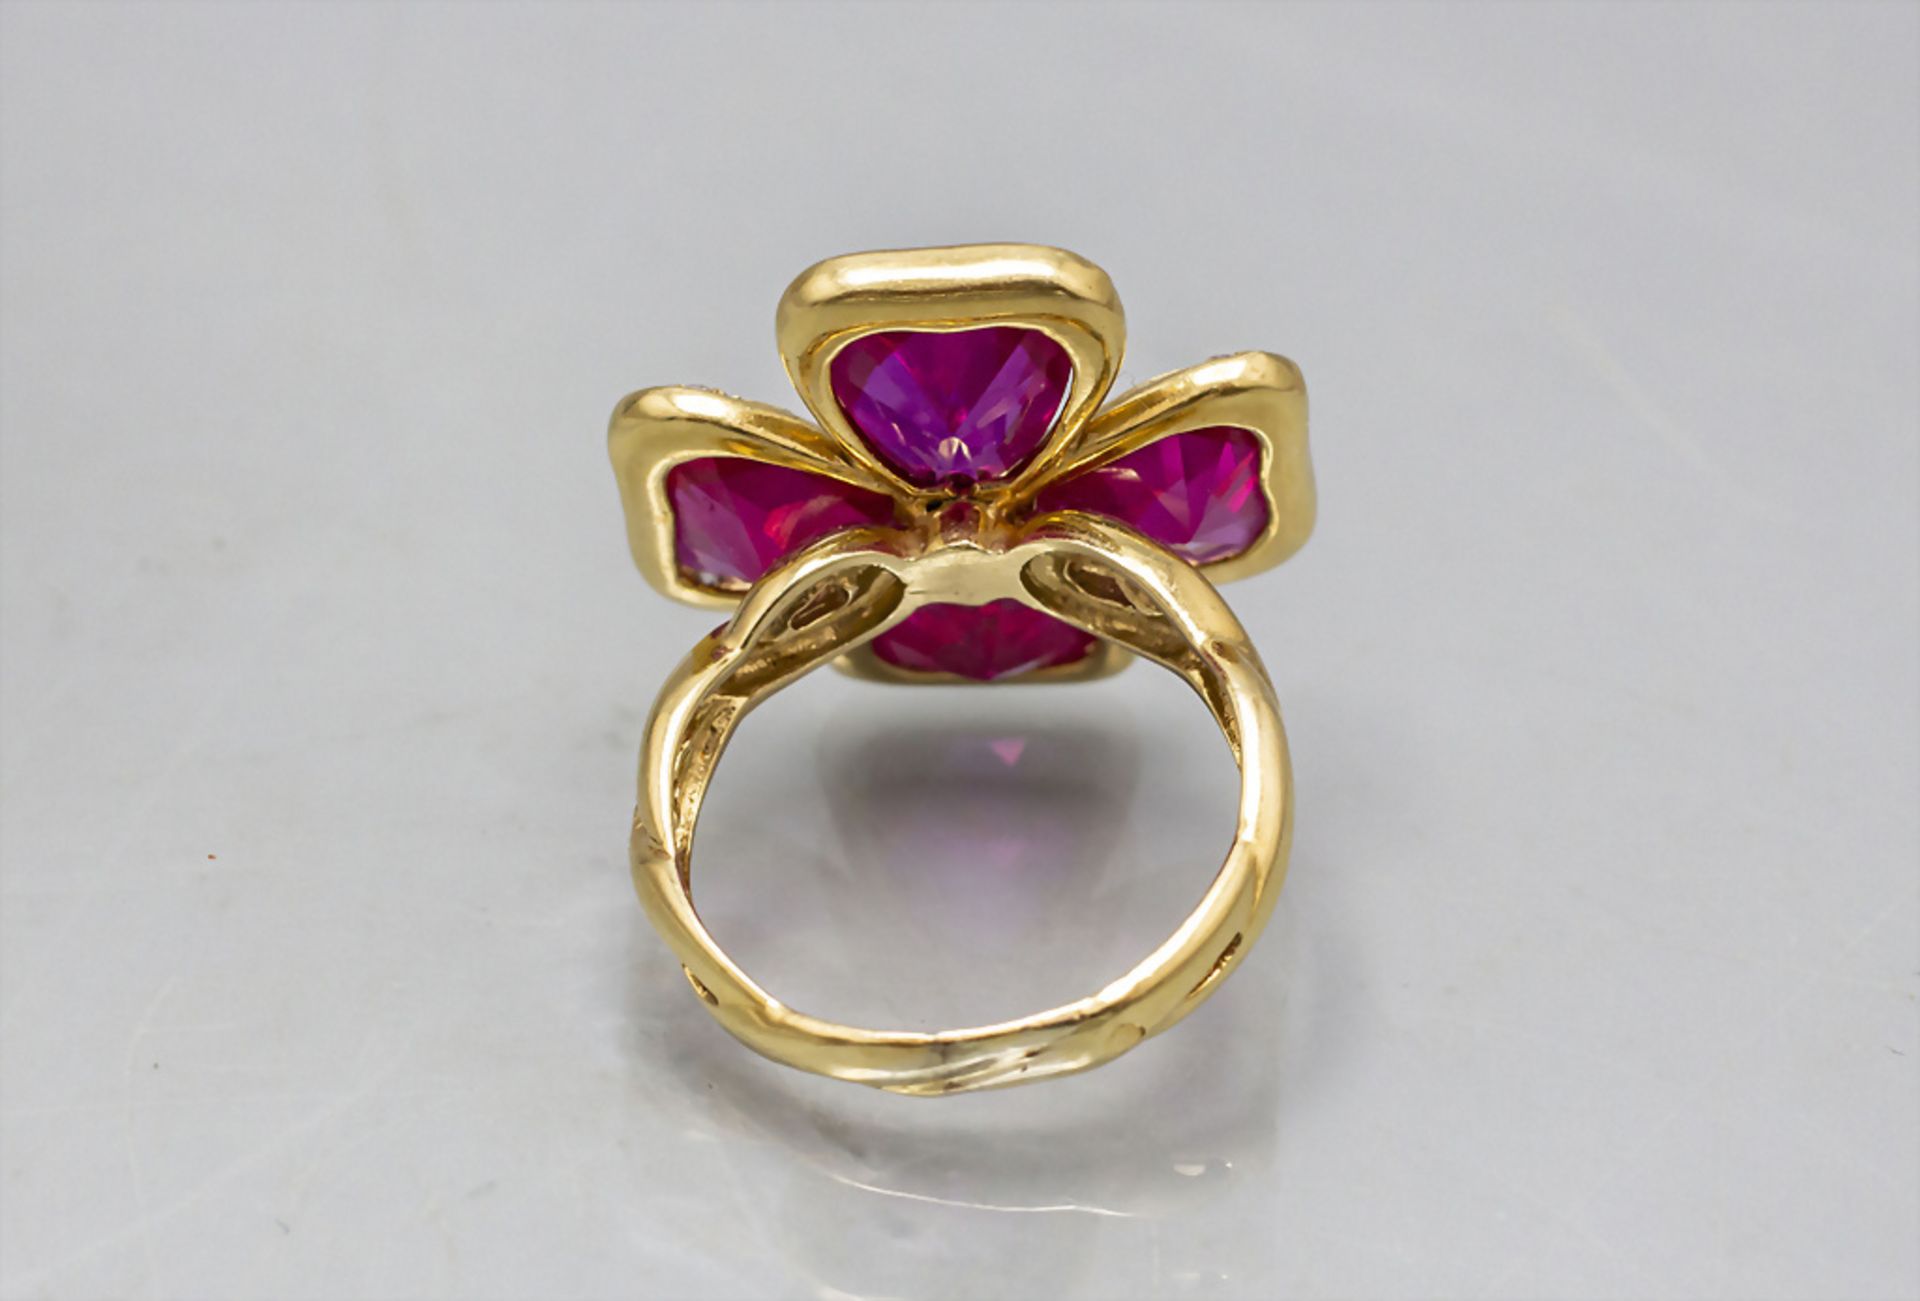 Damenring mit großer Blüte / A ladies 14 ct gold ring with a blossom, 2. Hälfte 20. Jh. - Image 3 of 3